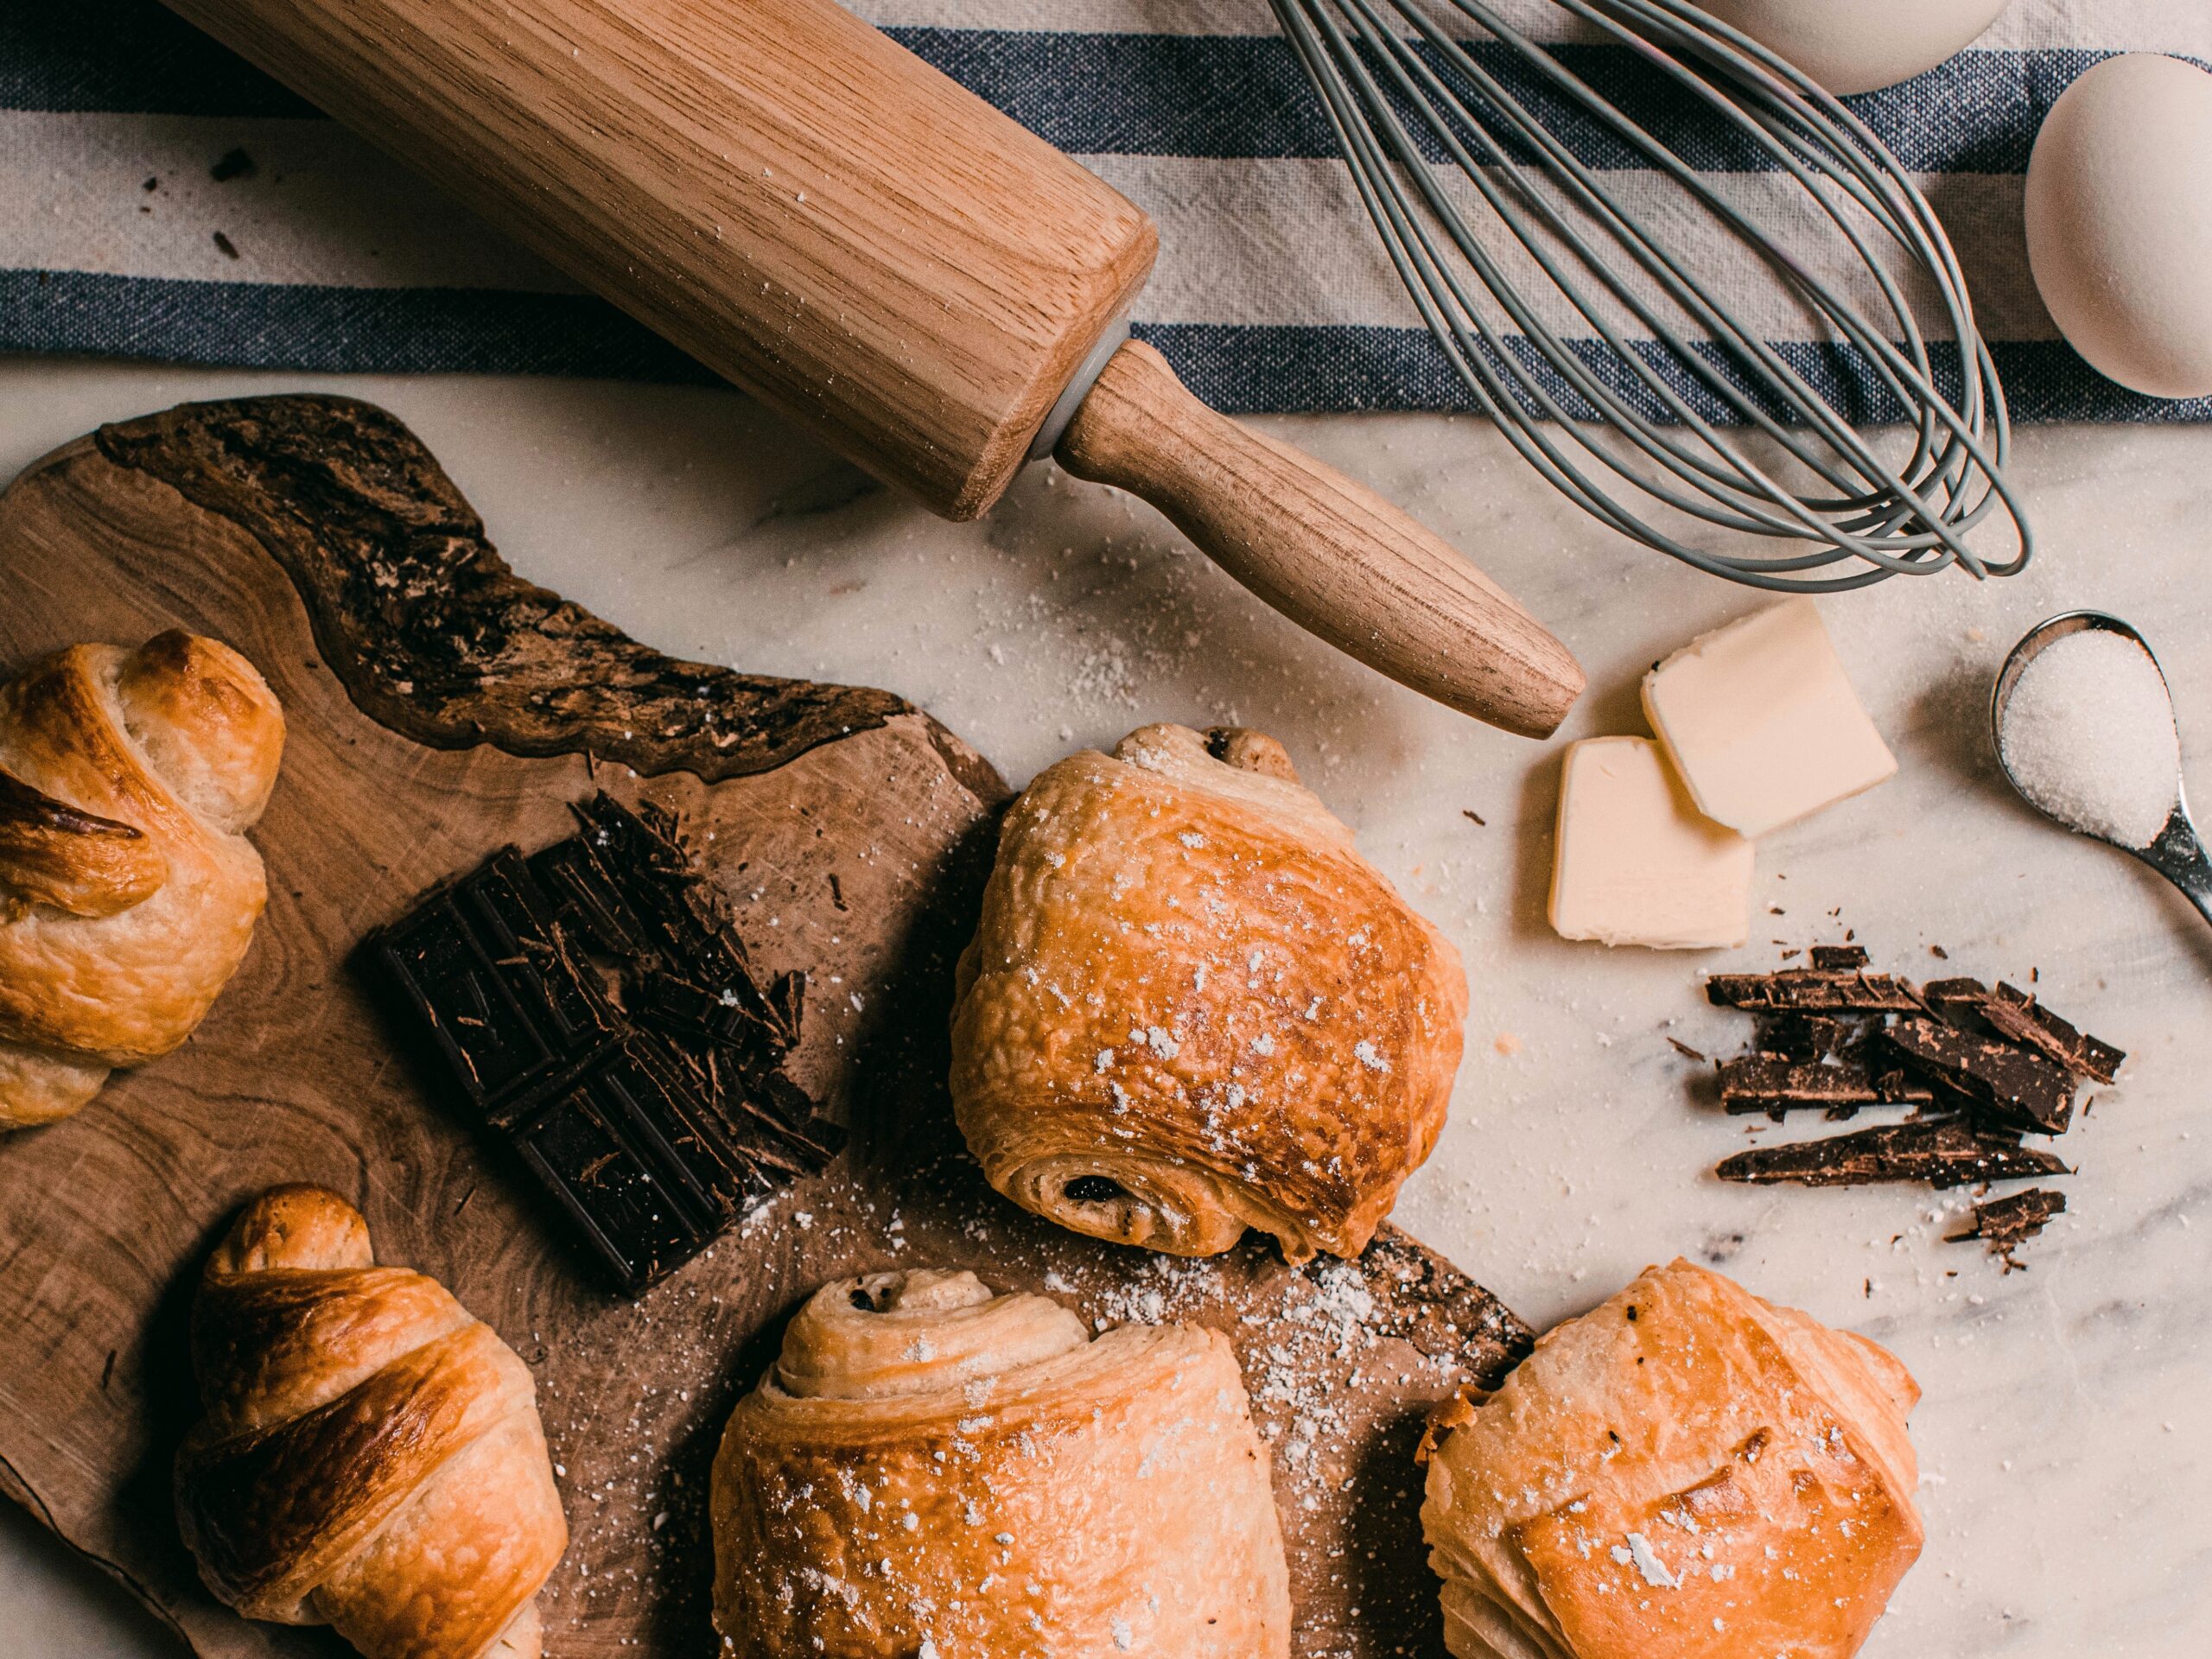 How To Promote A Home Baking Business